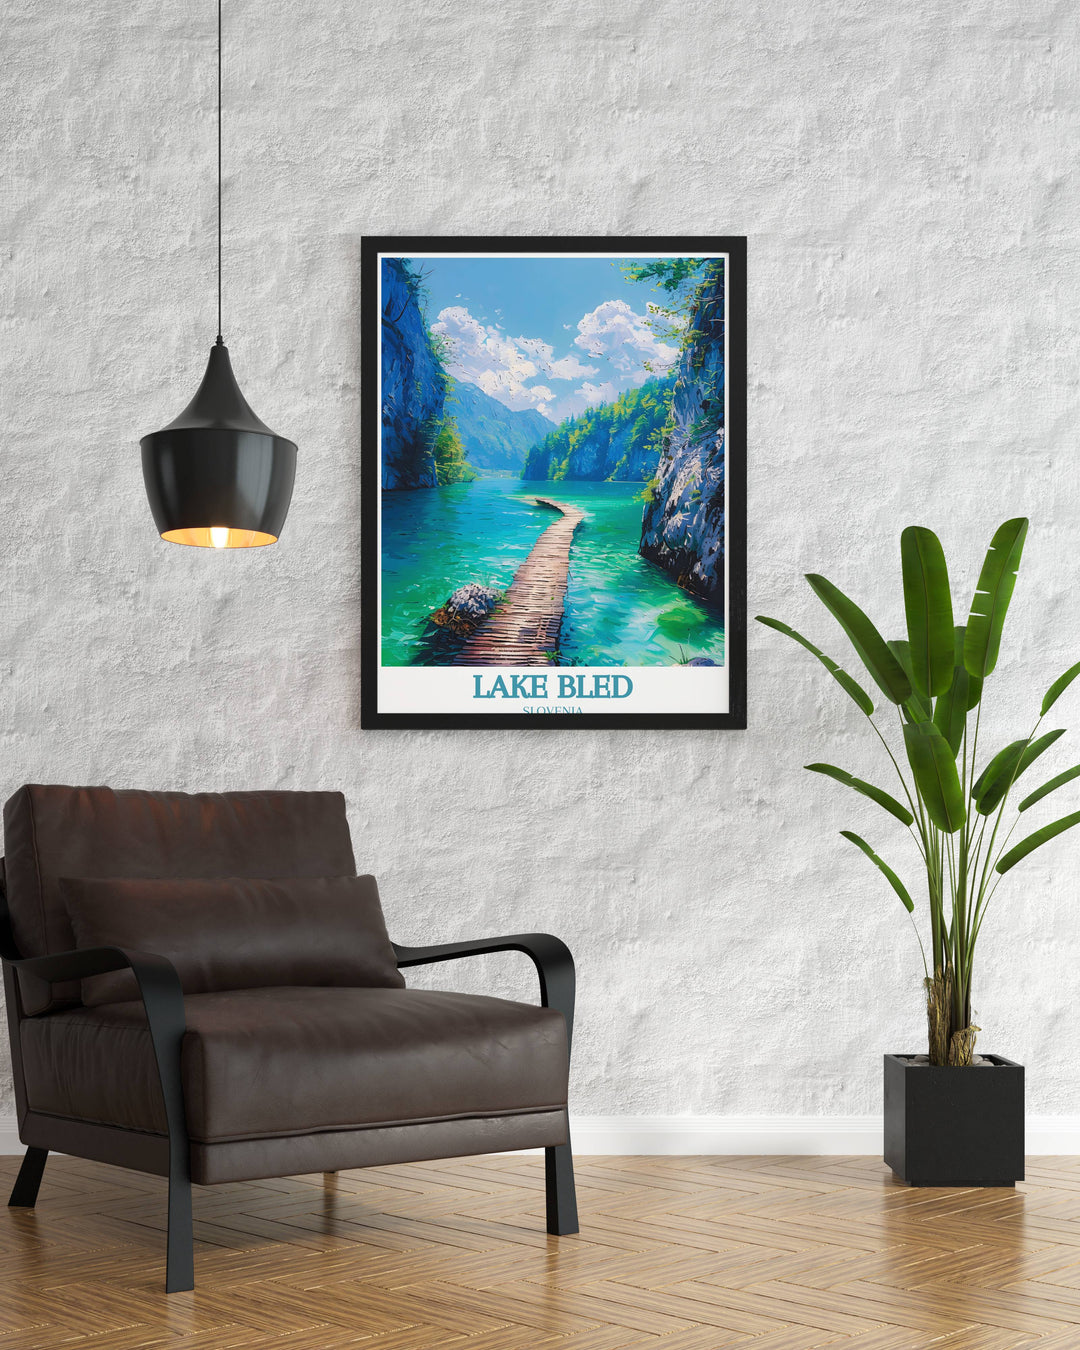 Peaceful Lake Bled Print showcasing the reflection of mountains in the still lake waters, perfect for creating a serene ambiance